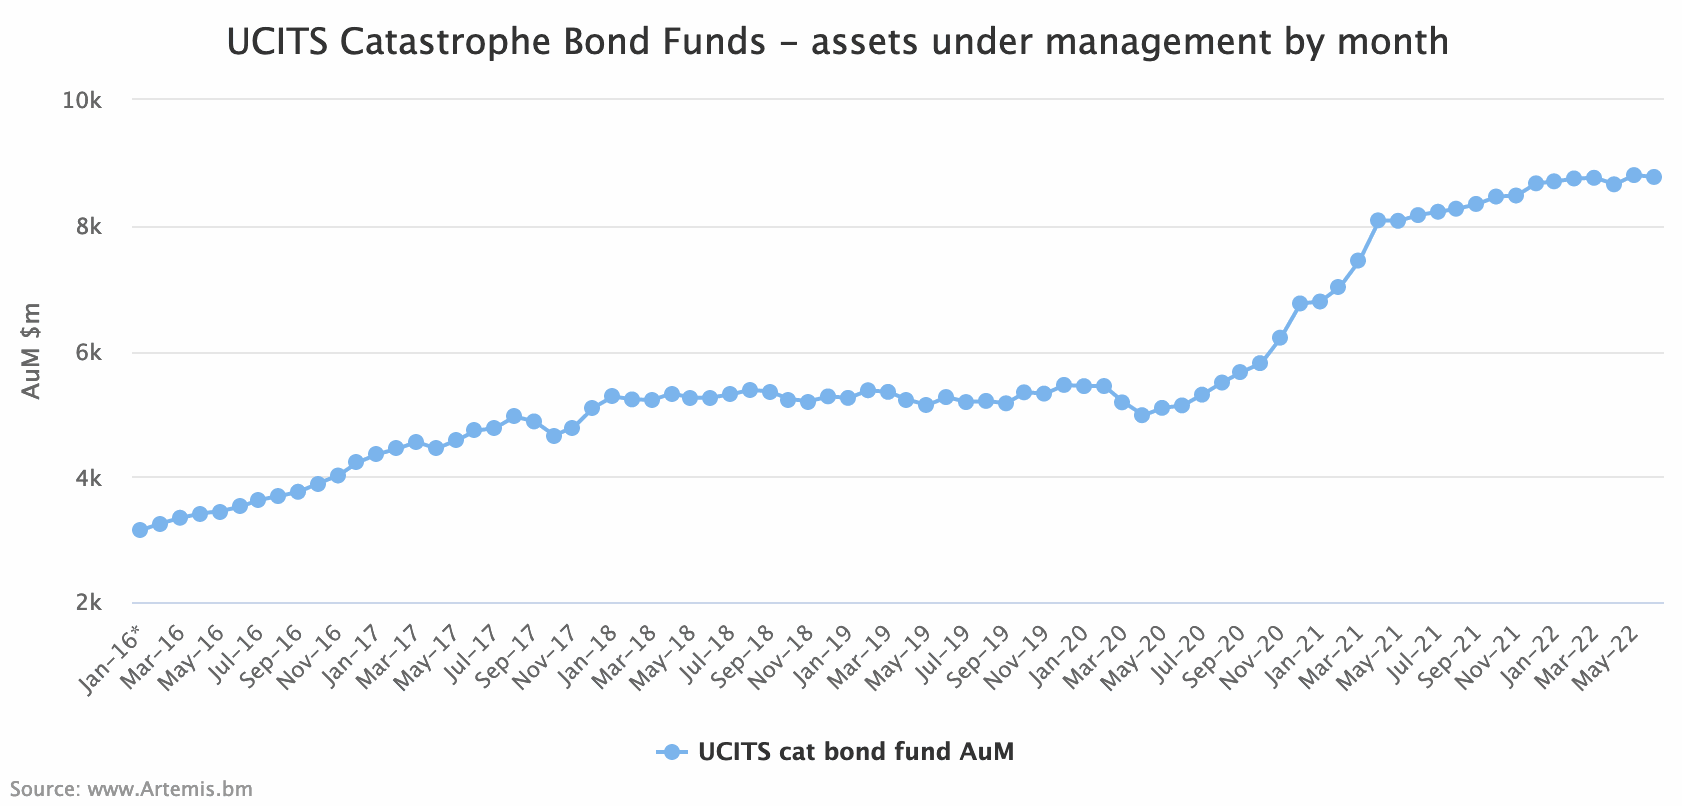 Assets of the UCITS catastrophe bond fund by month - until the end of June 2022